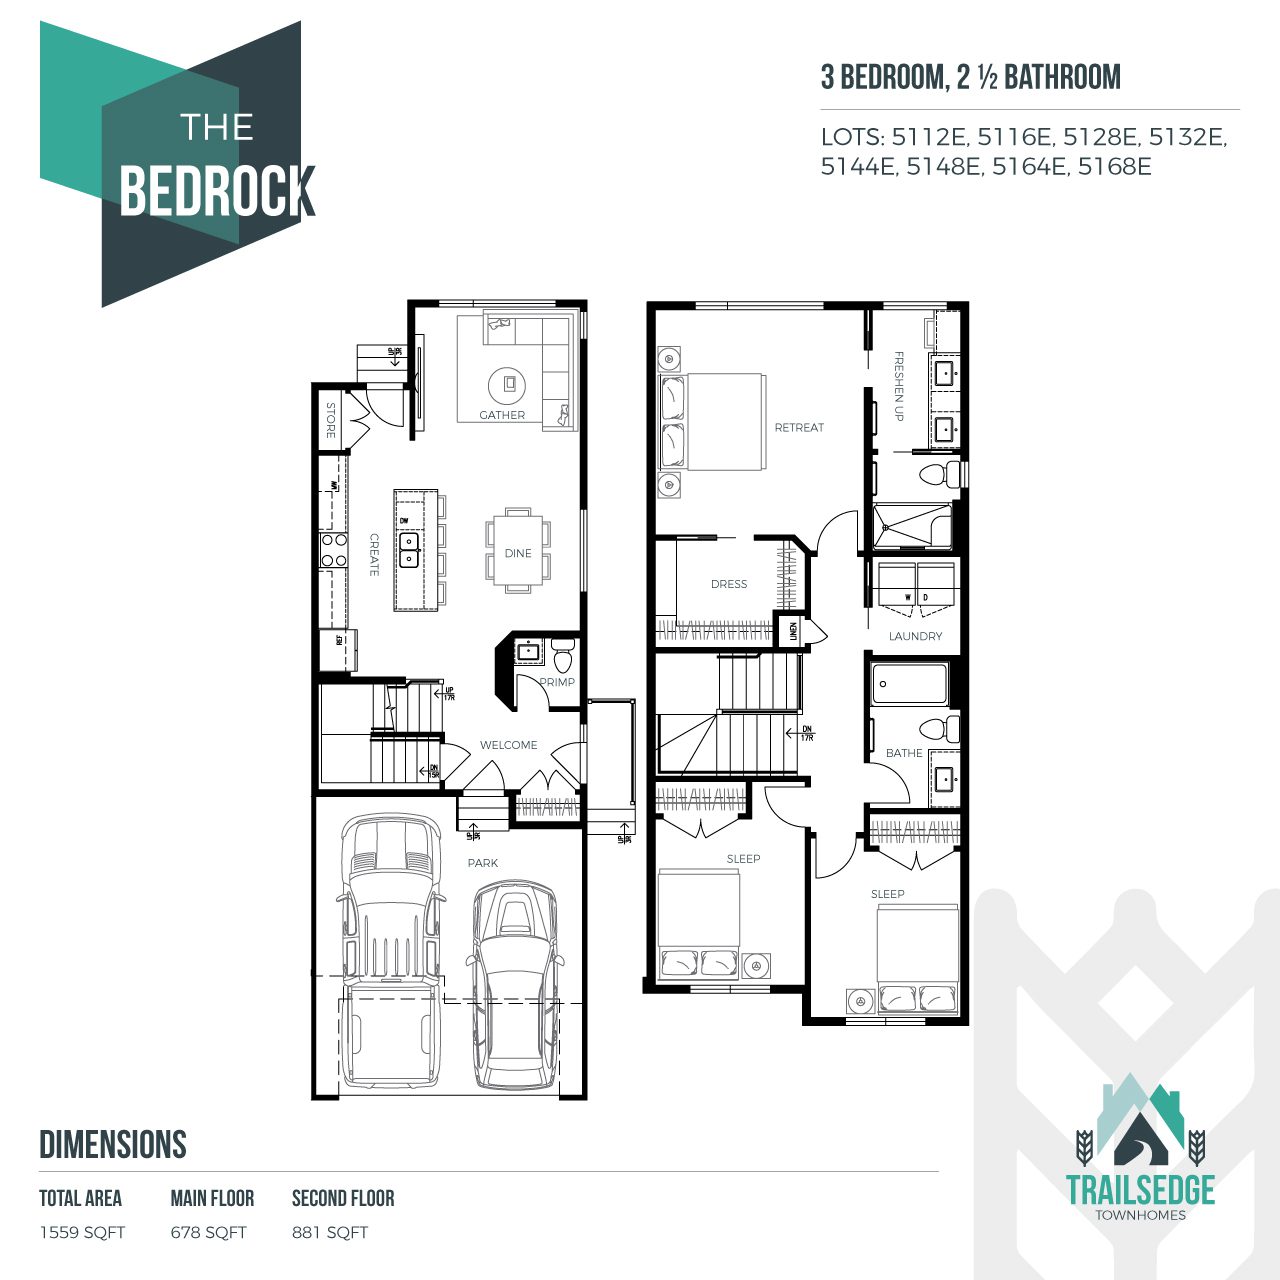 Shows the floor plan layout on the main level, it shows an open concept main floor with kitchen, dining, living with side entry and powder room and attached double car garage. On the second level, it shows a 3 bedroom plan with two bathrooms and upstairs laundry.